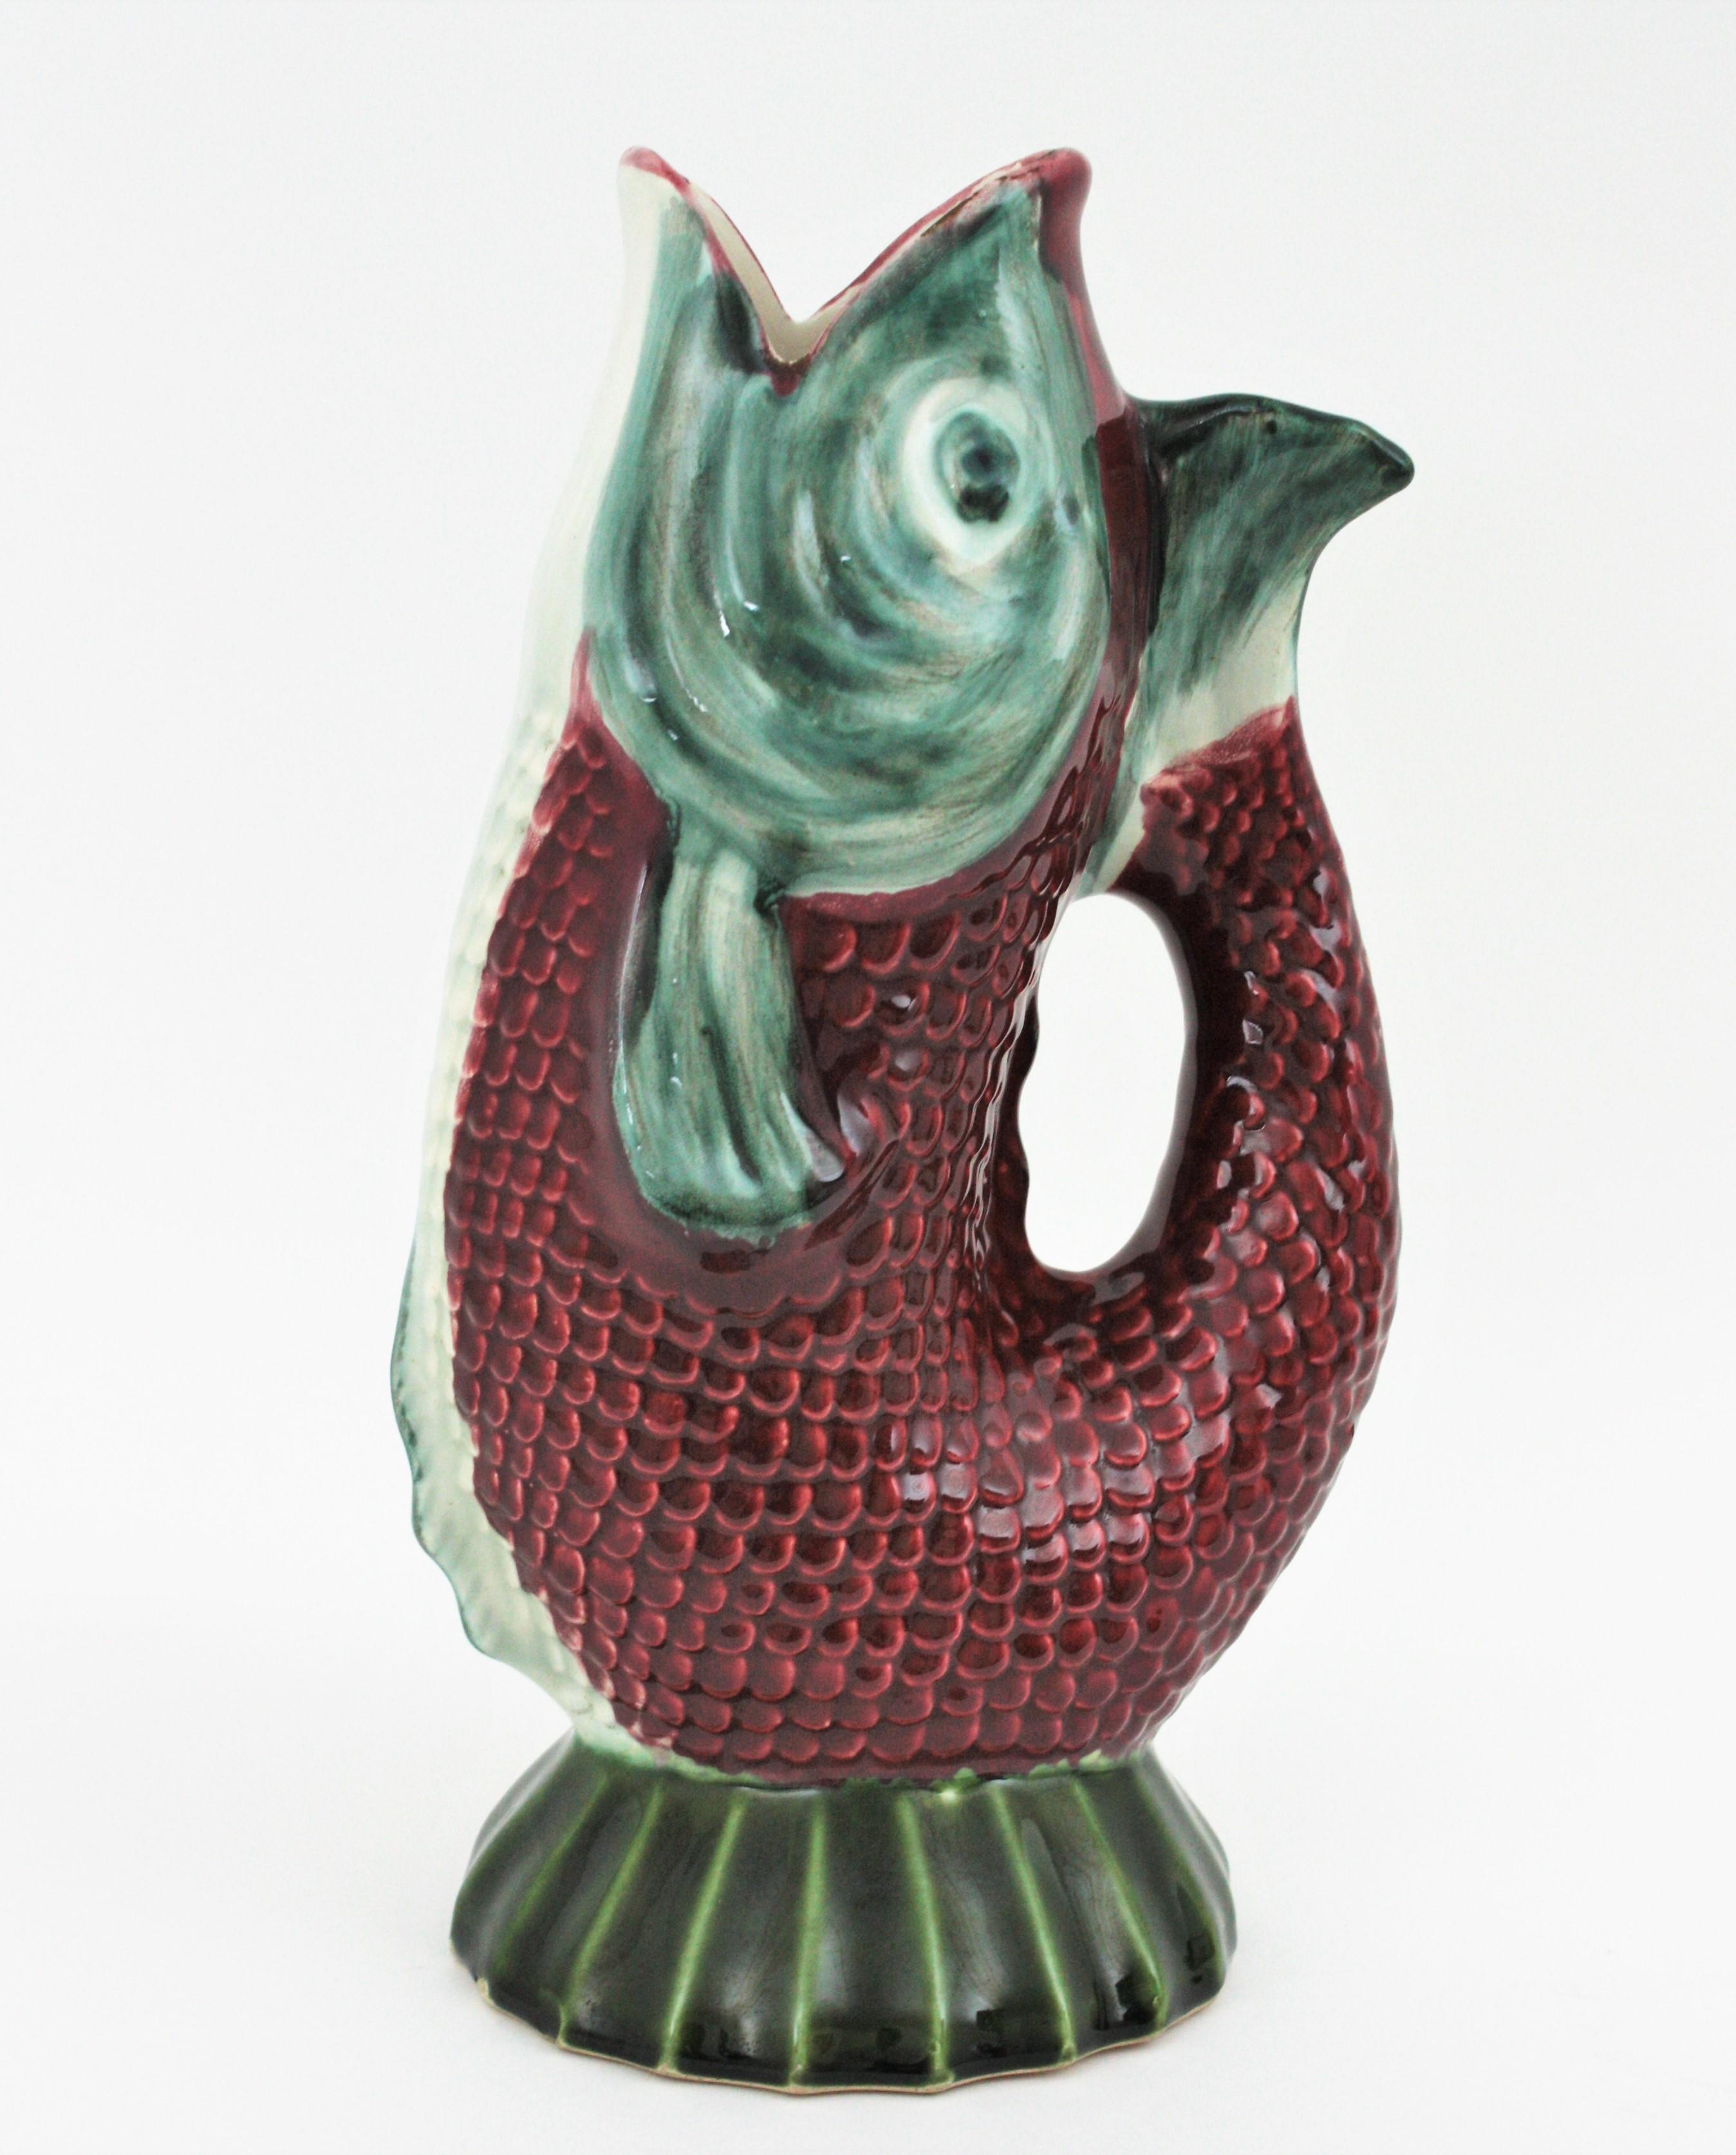 Oversized Mid-Century Modernist glazed ceramic gurgling fish water jug / pitcher. Portugal, 1930s-1940s
Eye-catching hand painted burgundy red, white and green large Majolica ceramic vase, fish glug jug or pitcher.
This fish jug vase will be a